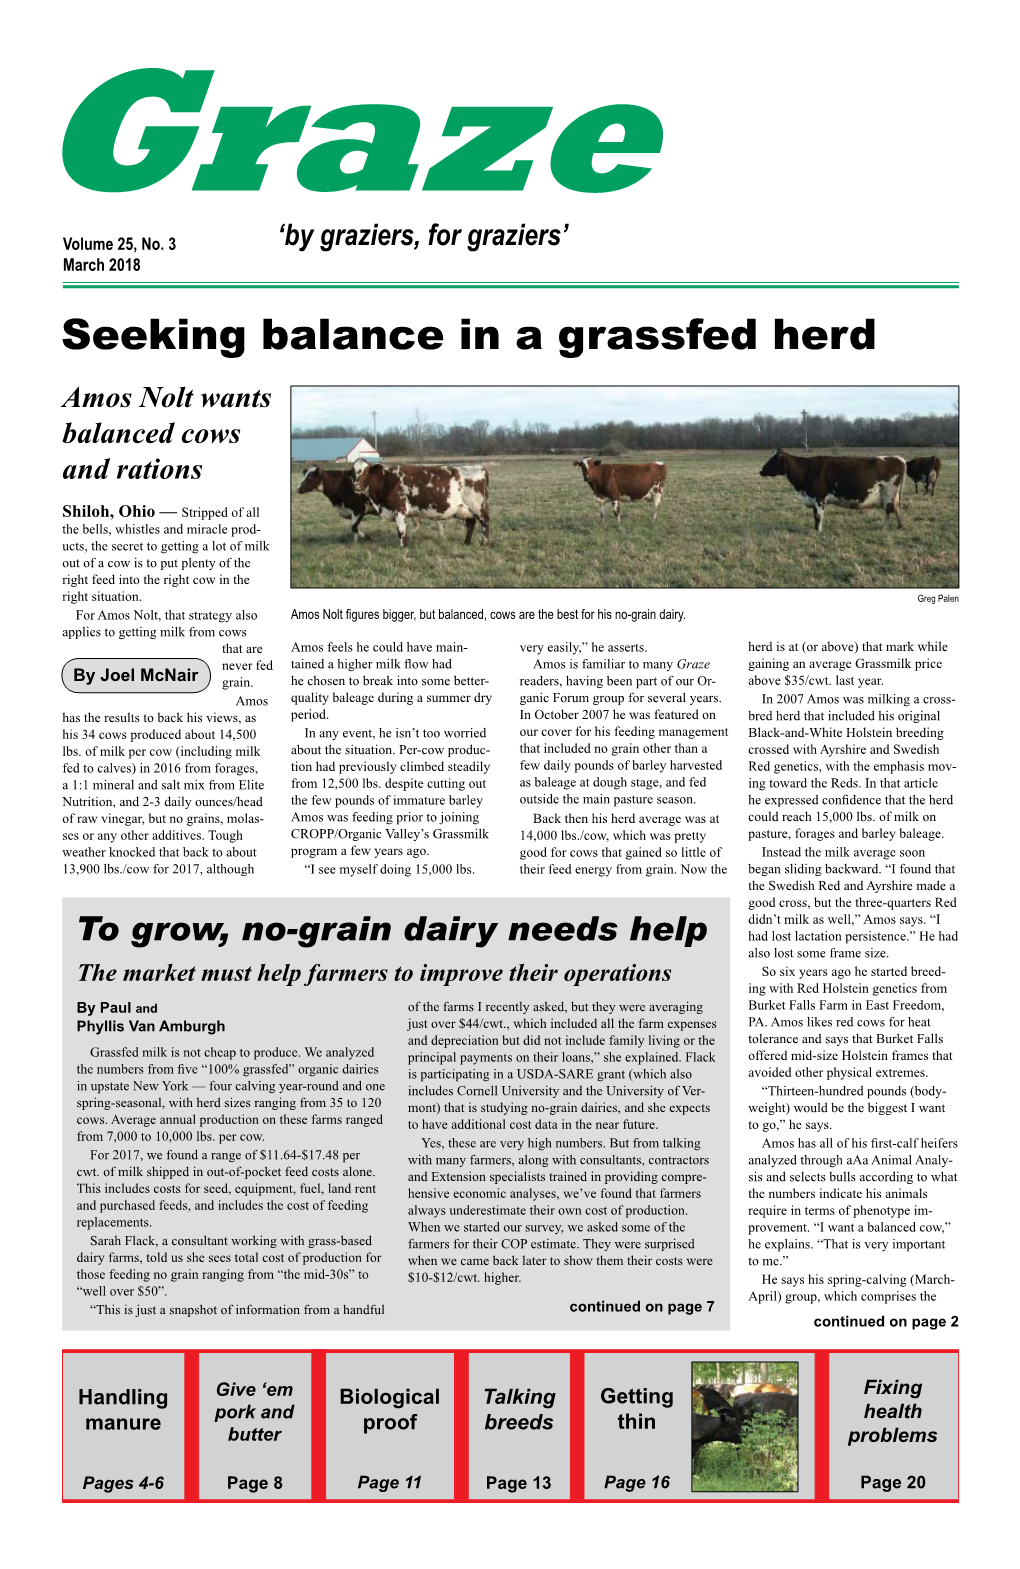 Seeking Balance in a Grassfed Herd Amos Nolt Wants Balanced Cows and Rations